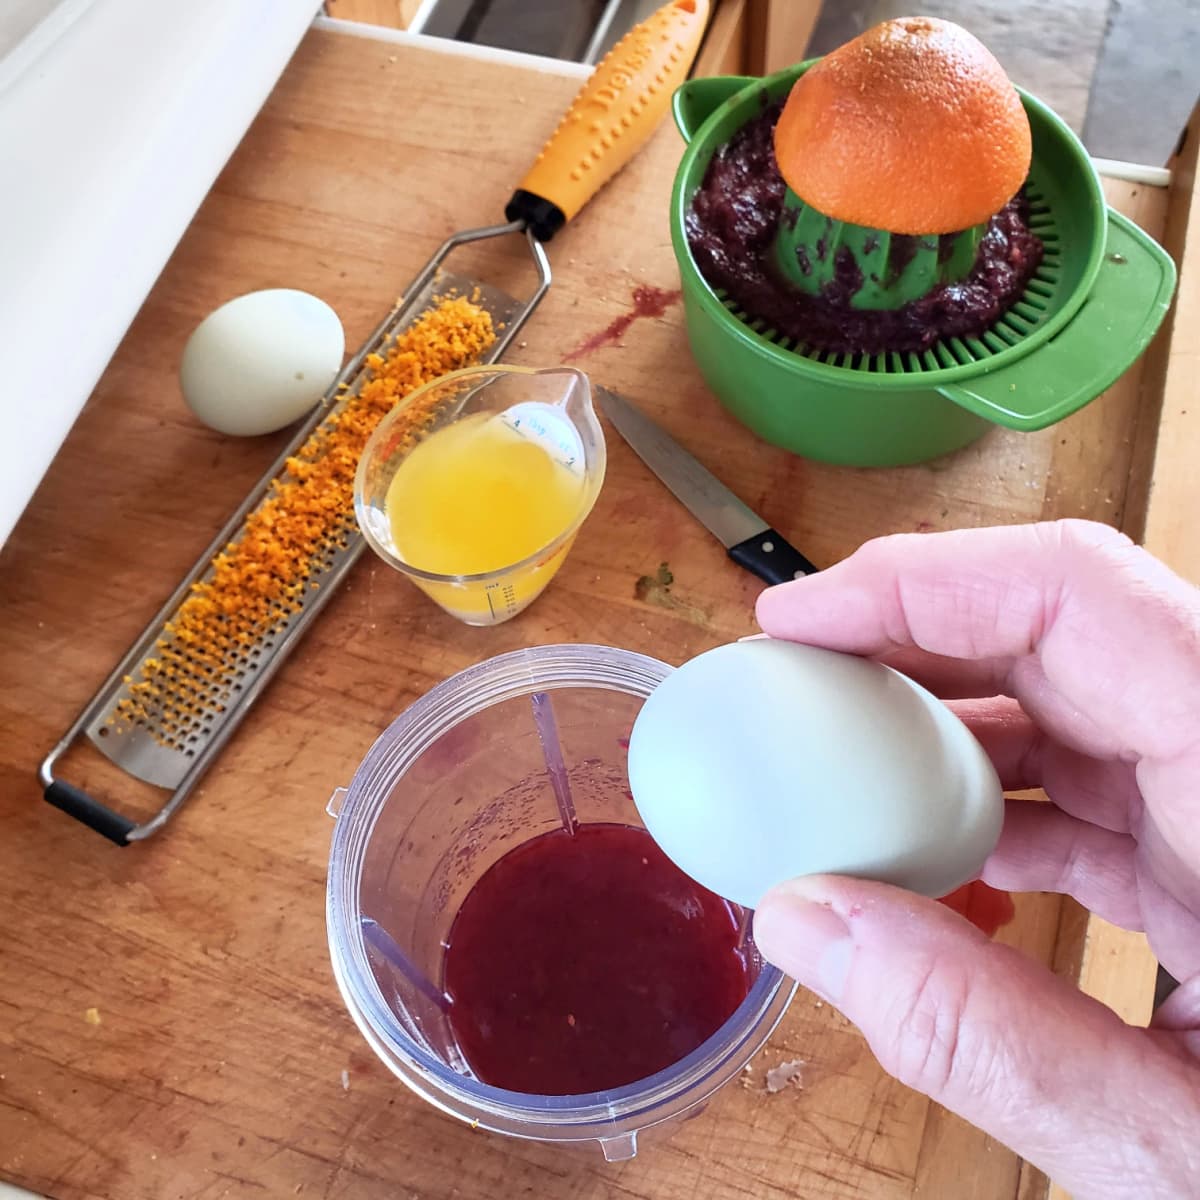 Array of ingredients on a wooden cutting board, with a hand holding a light blue egg over the edge of a container ready to crack it